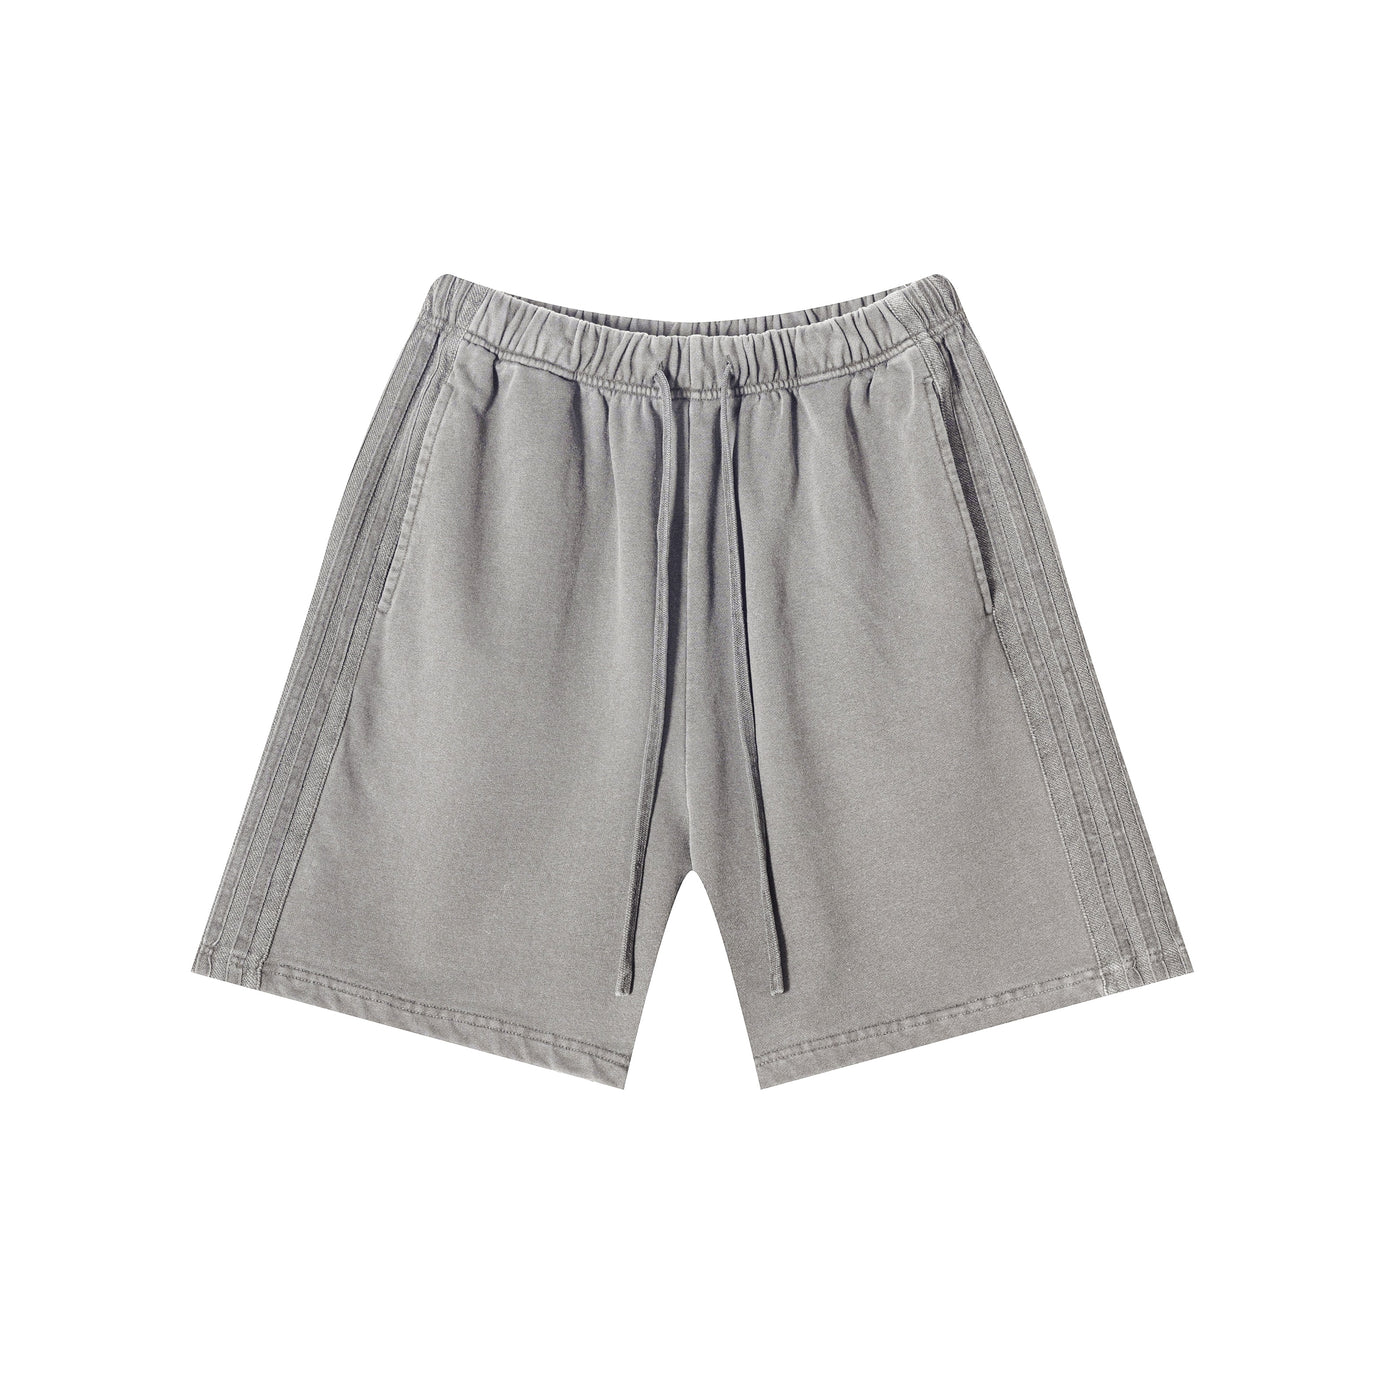 F3F Select Duty Washed & Old Spliced Striped Short Sweatpants